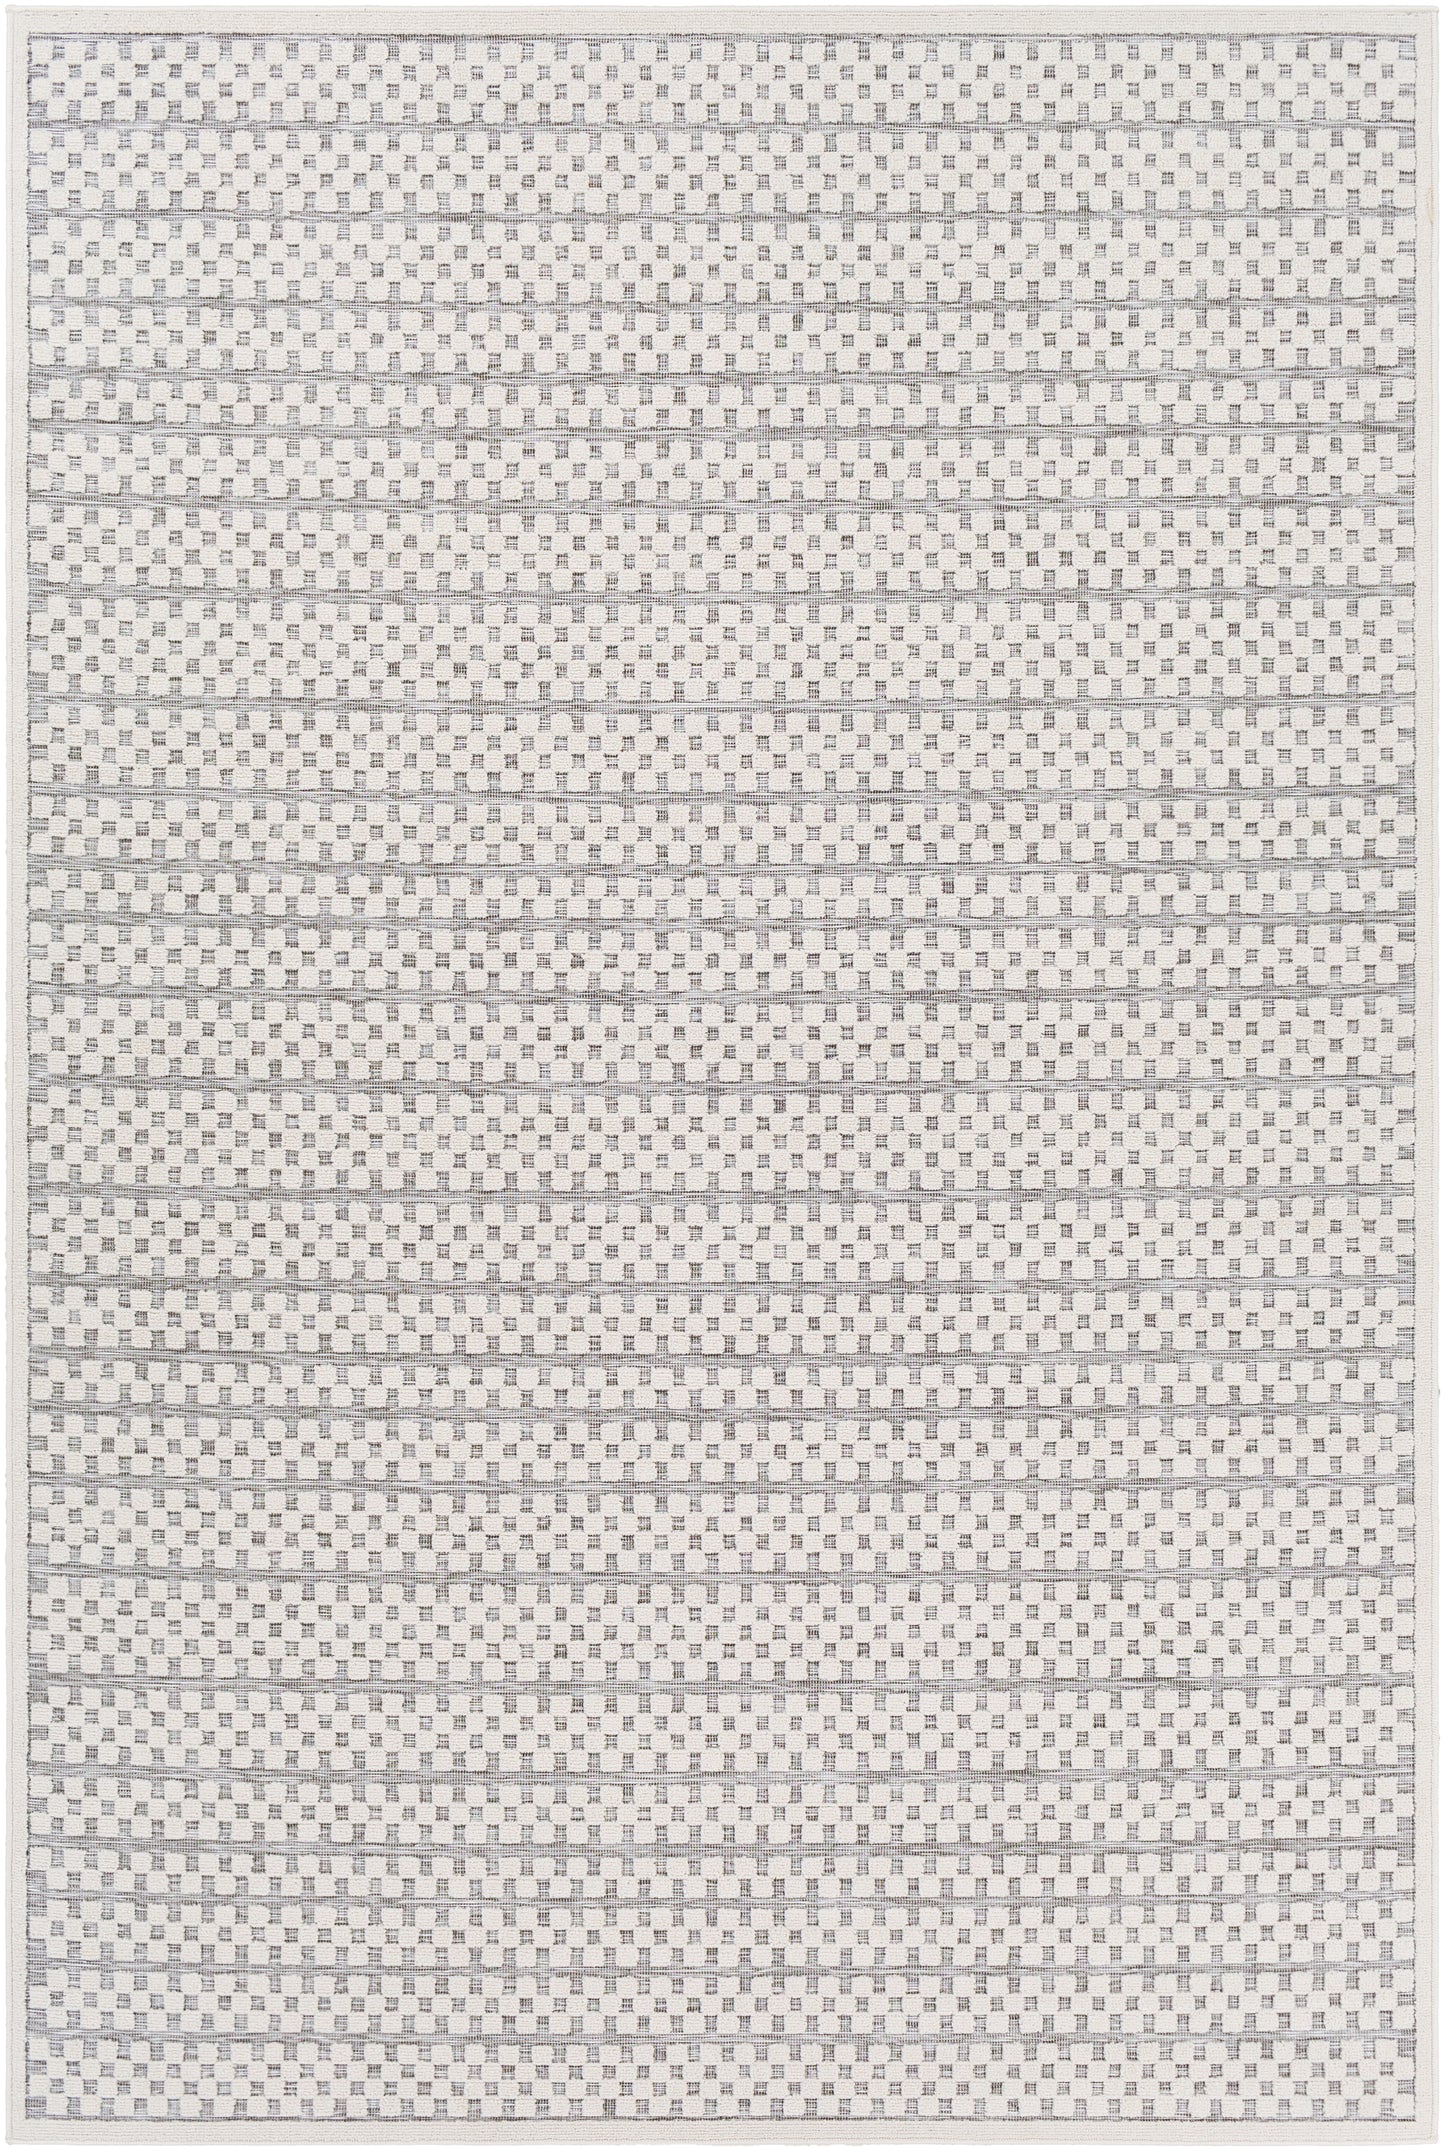 Greenwich 26773 Machine Woven Synthetic Blend Indoor/Outdoor Area Rug by Surya Rugs